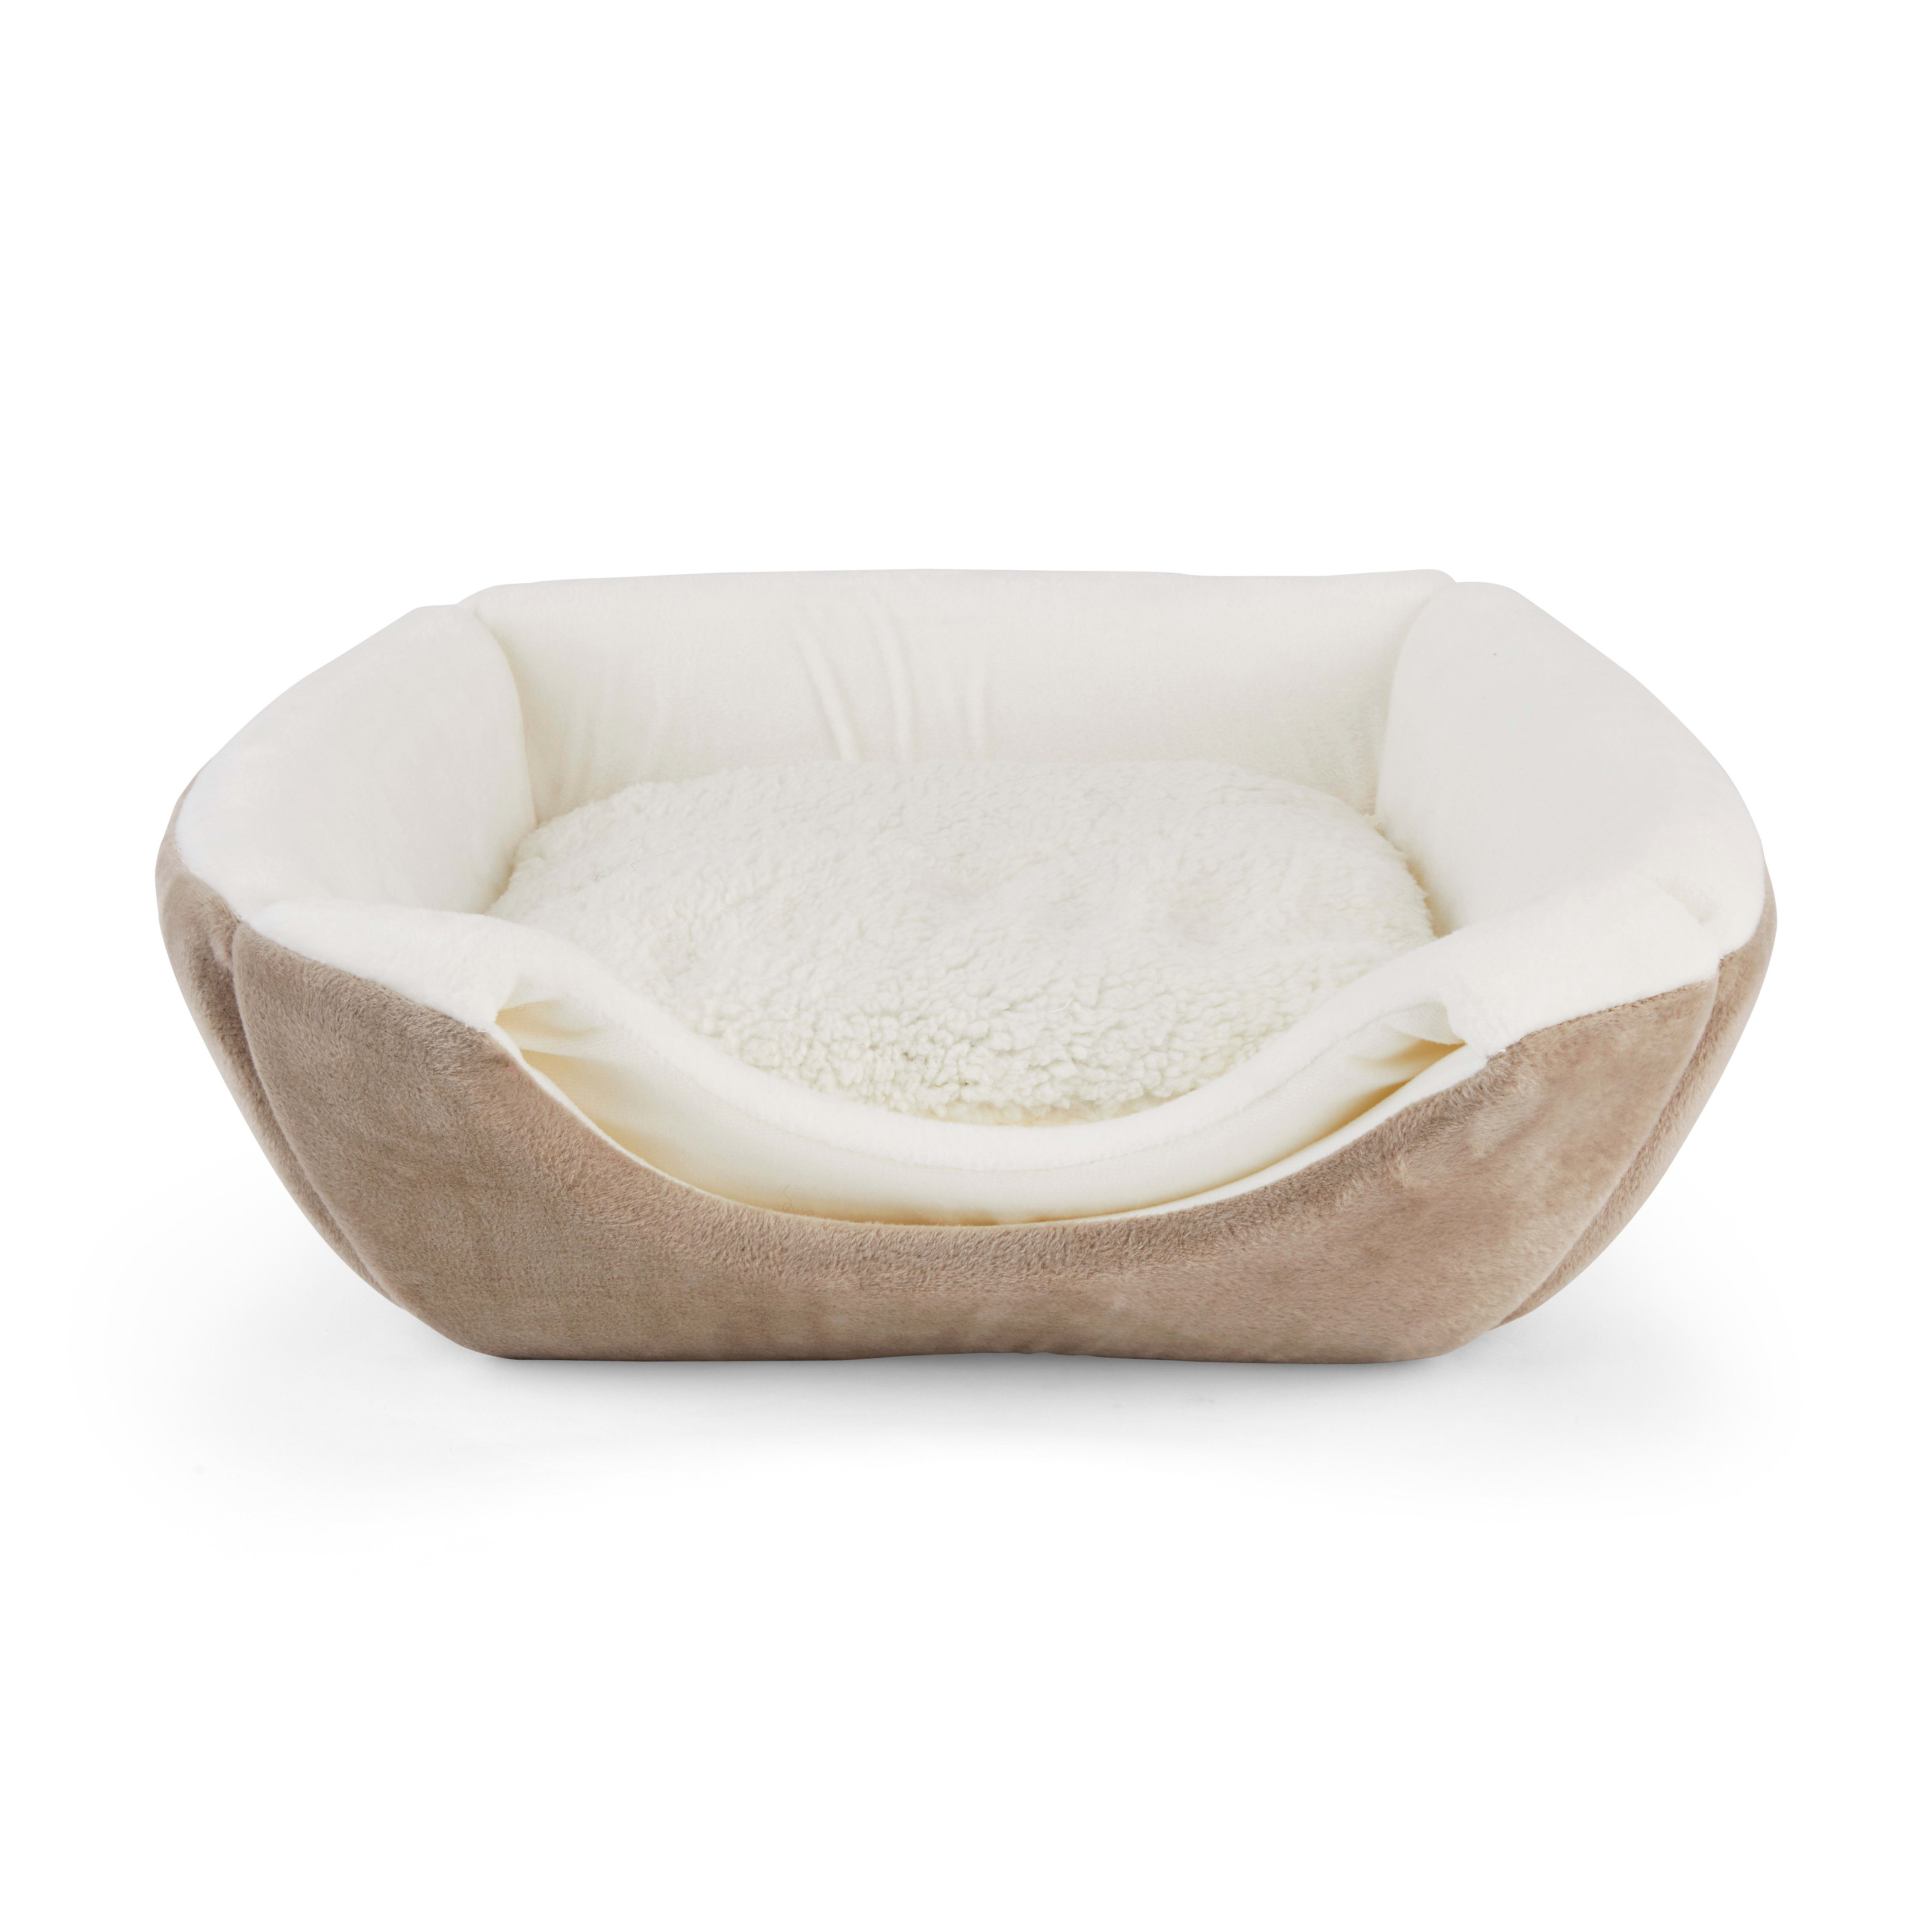 The ultimate cat treat is a luxurious cat bed  Online pet shop The Pet  Empire - The Pet Empire